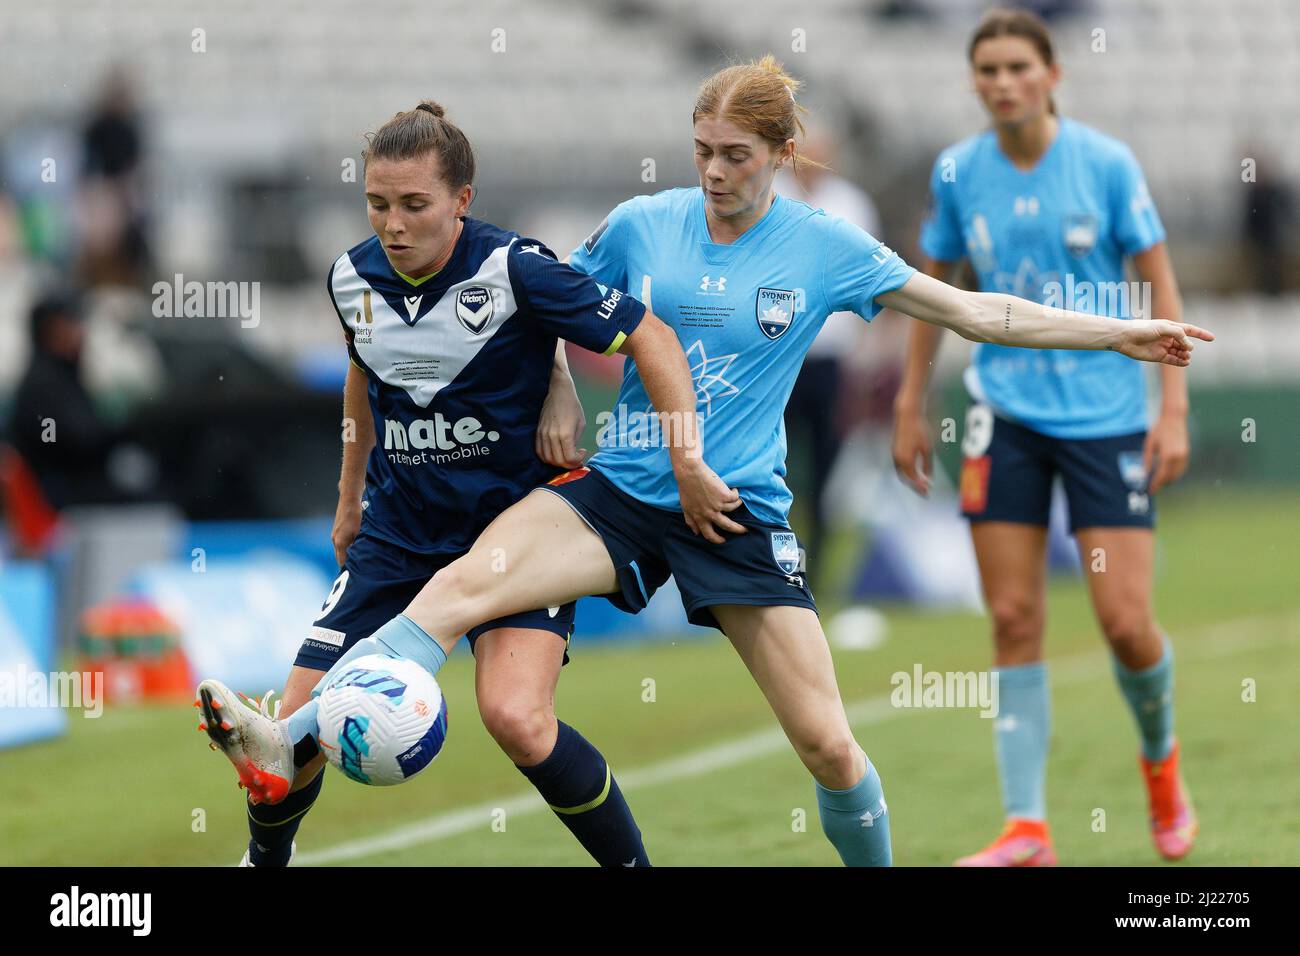 Catherine Zimmerman of Melbourne Victory is challenged by Cortnee Vine of Sydney FC during the A-League Womens Grand Final match between Sydney FC and Stock Photo